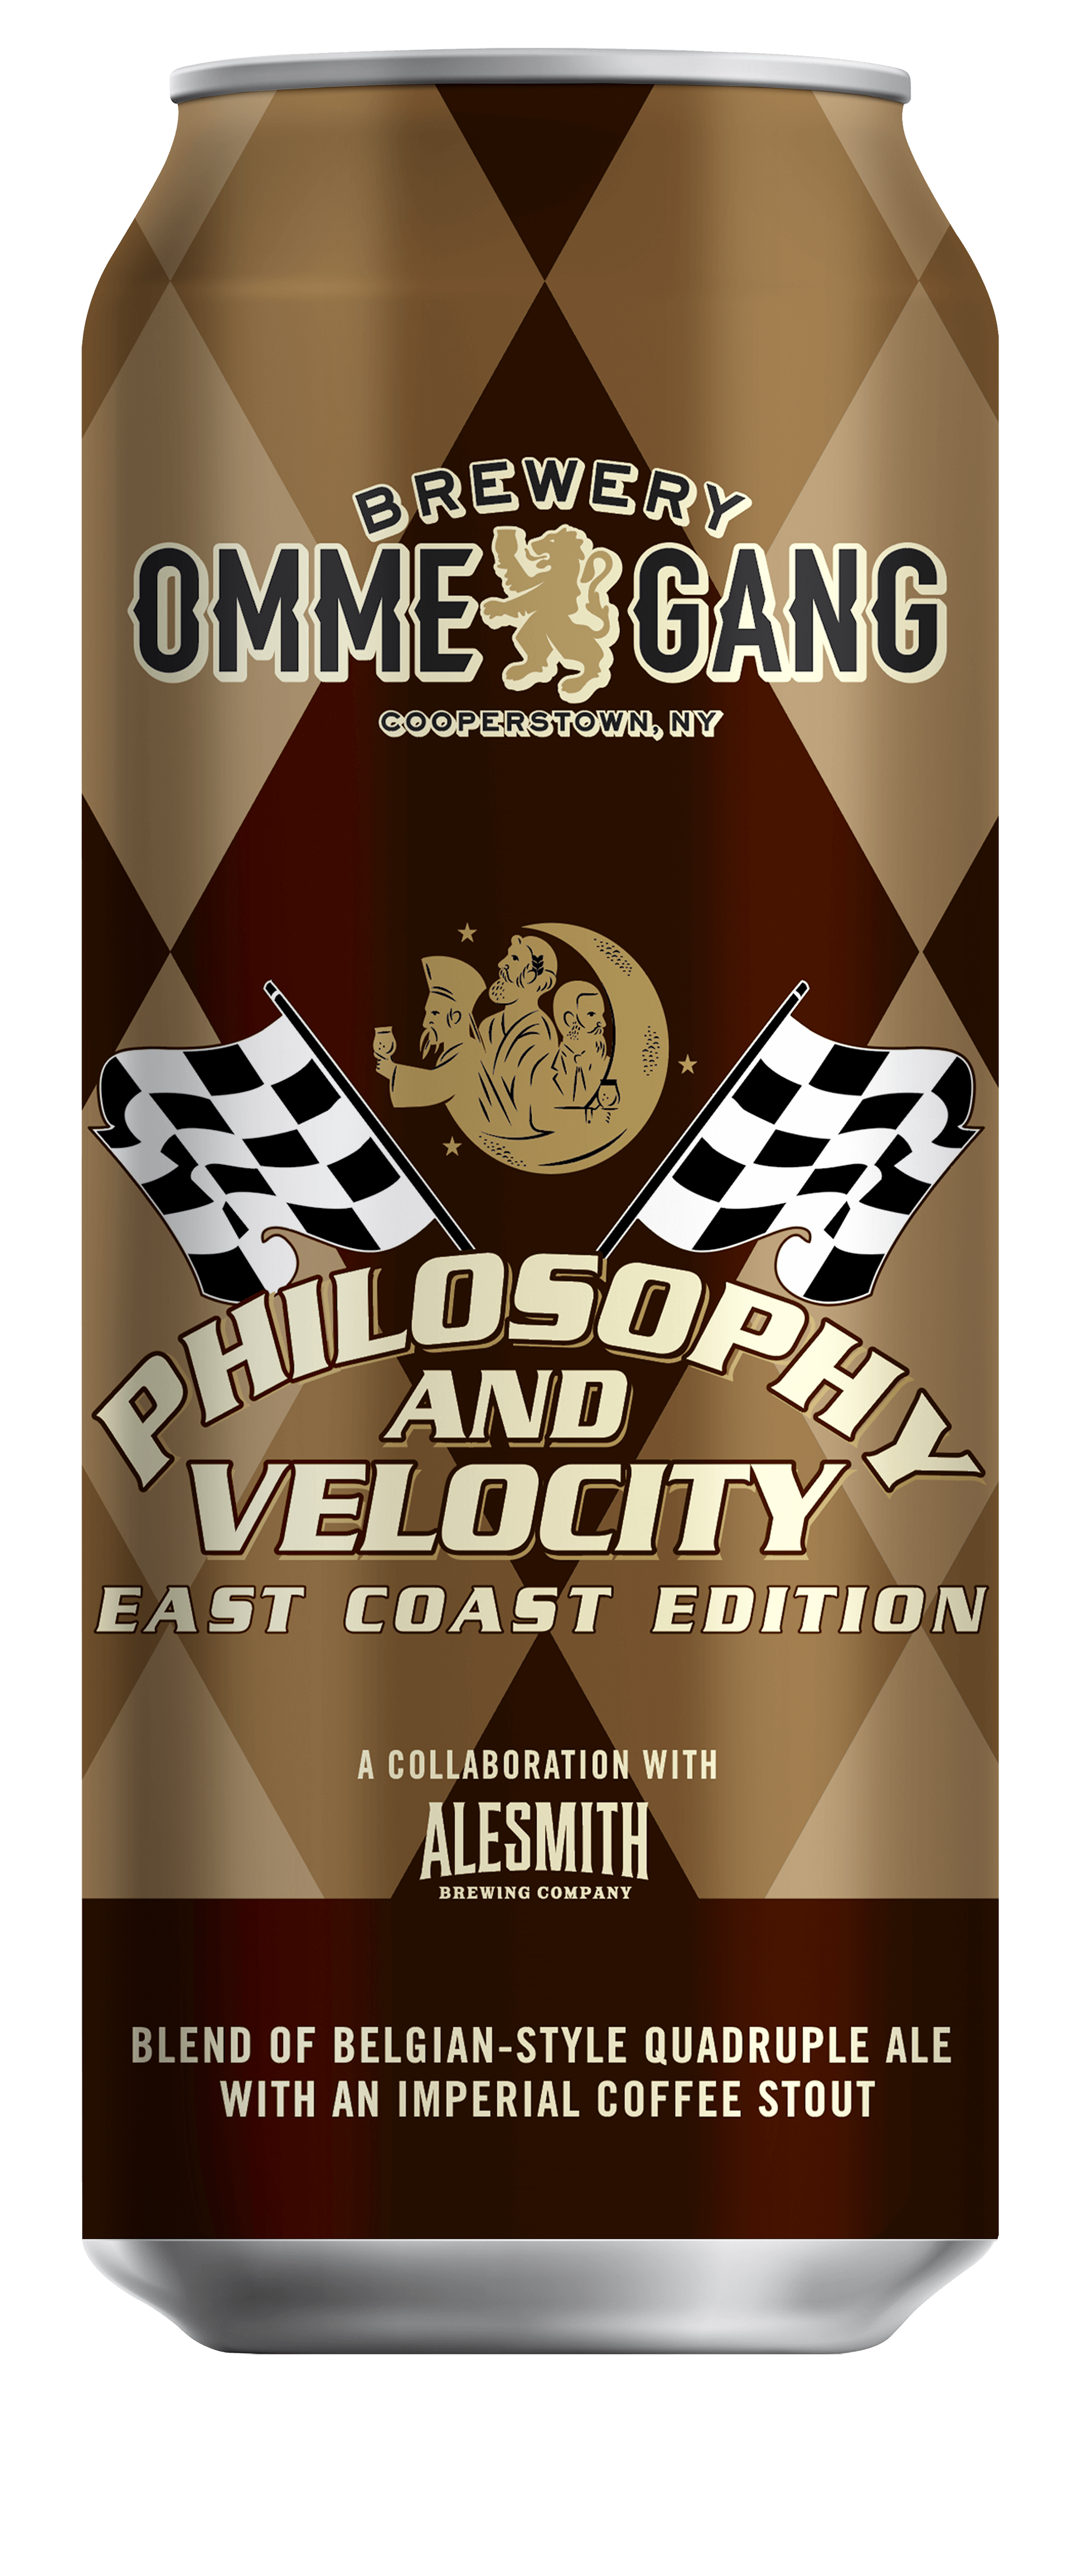 Philosophy And Velocity | An Alesmith Collaboration